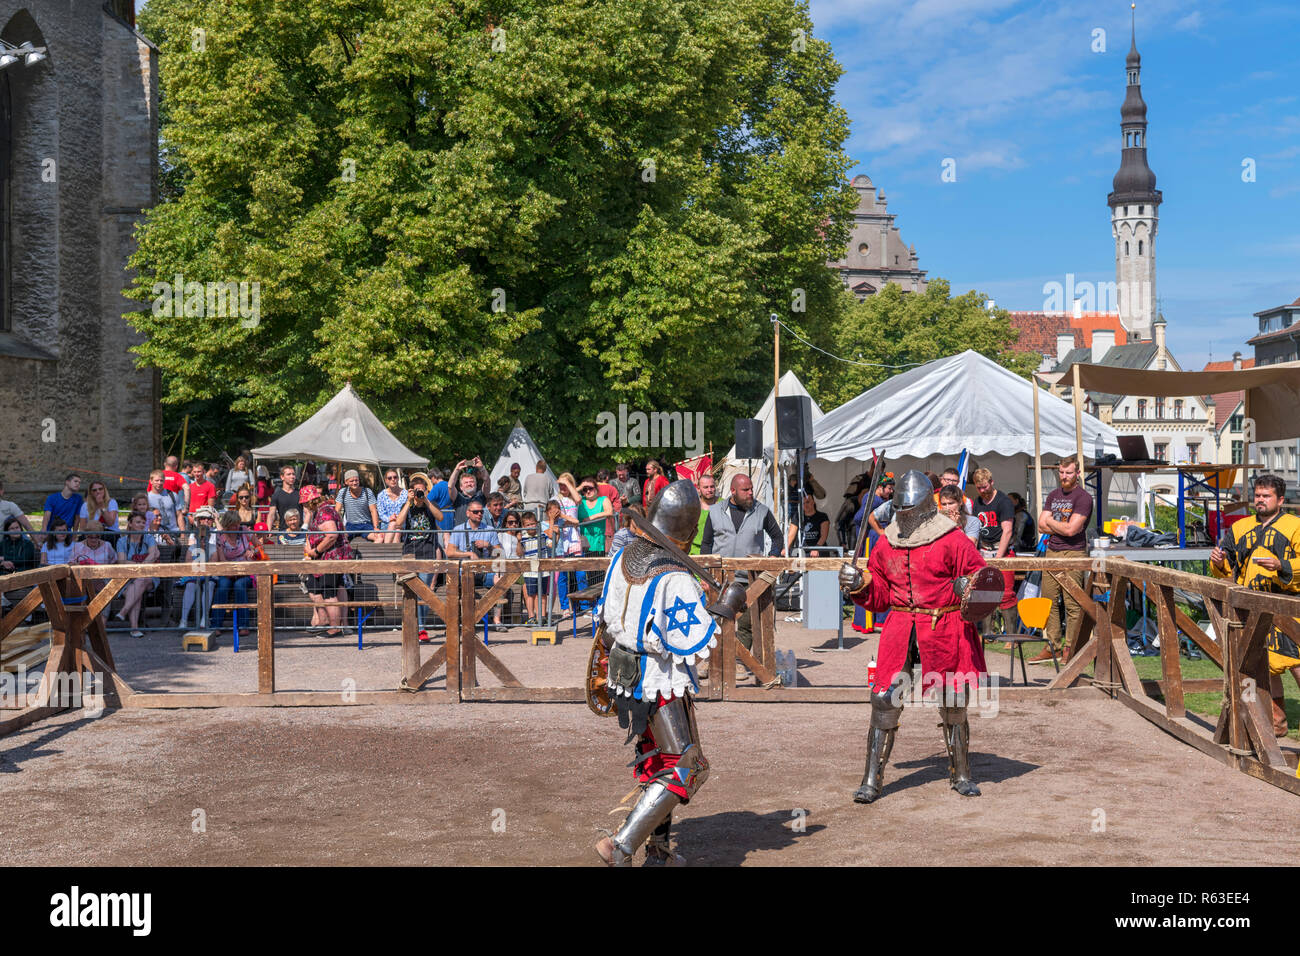 Sword fighting at the July 2018 Medieval Days Festival in the historic Old Town, Tallinn, Estonia Stock Photo